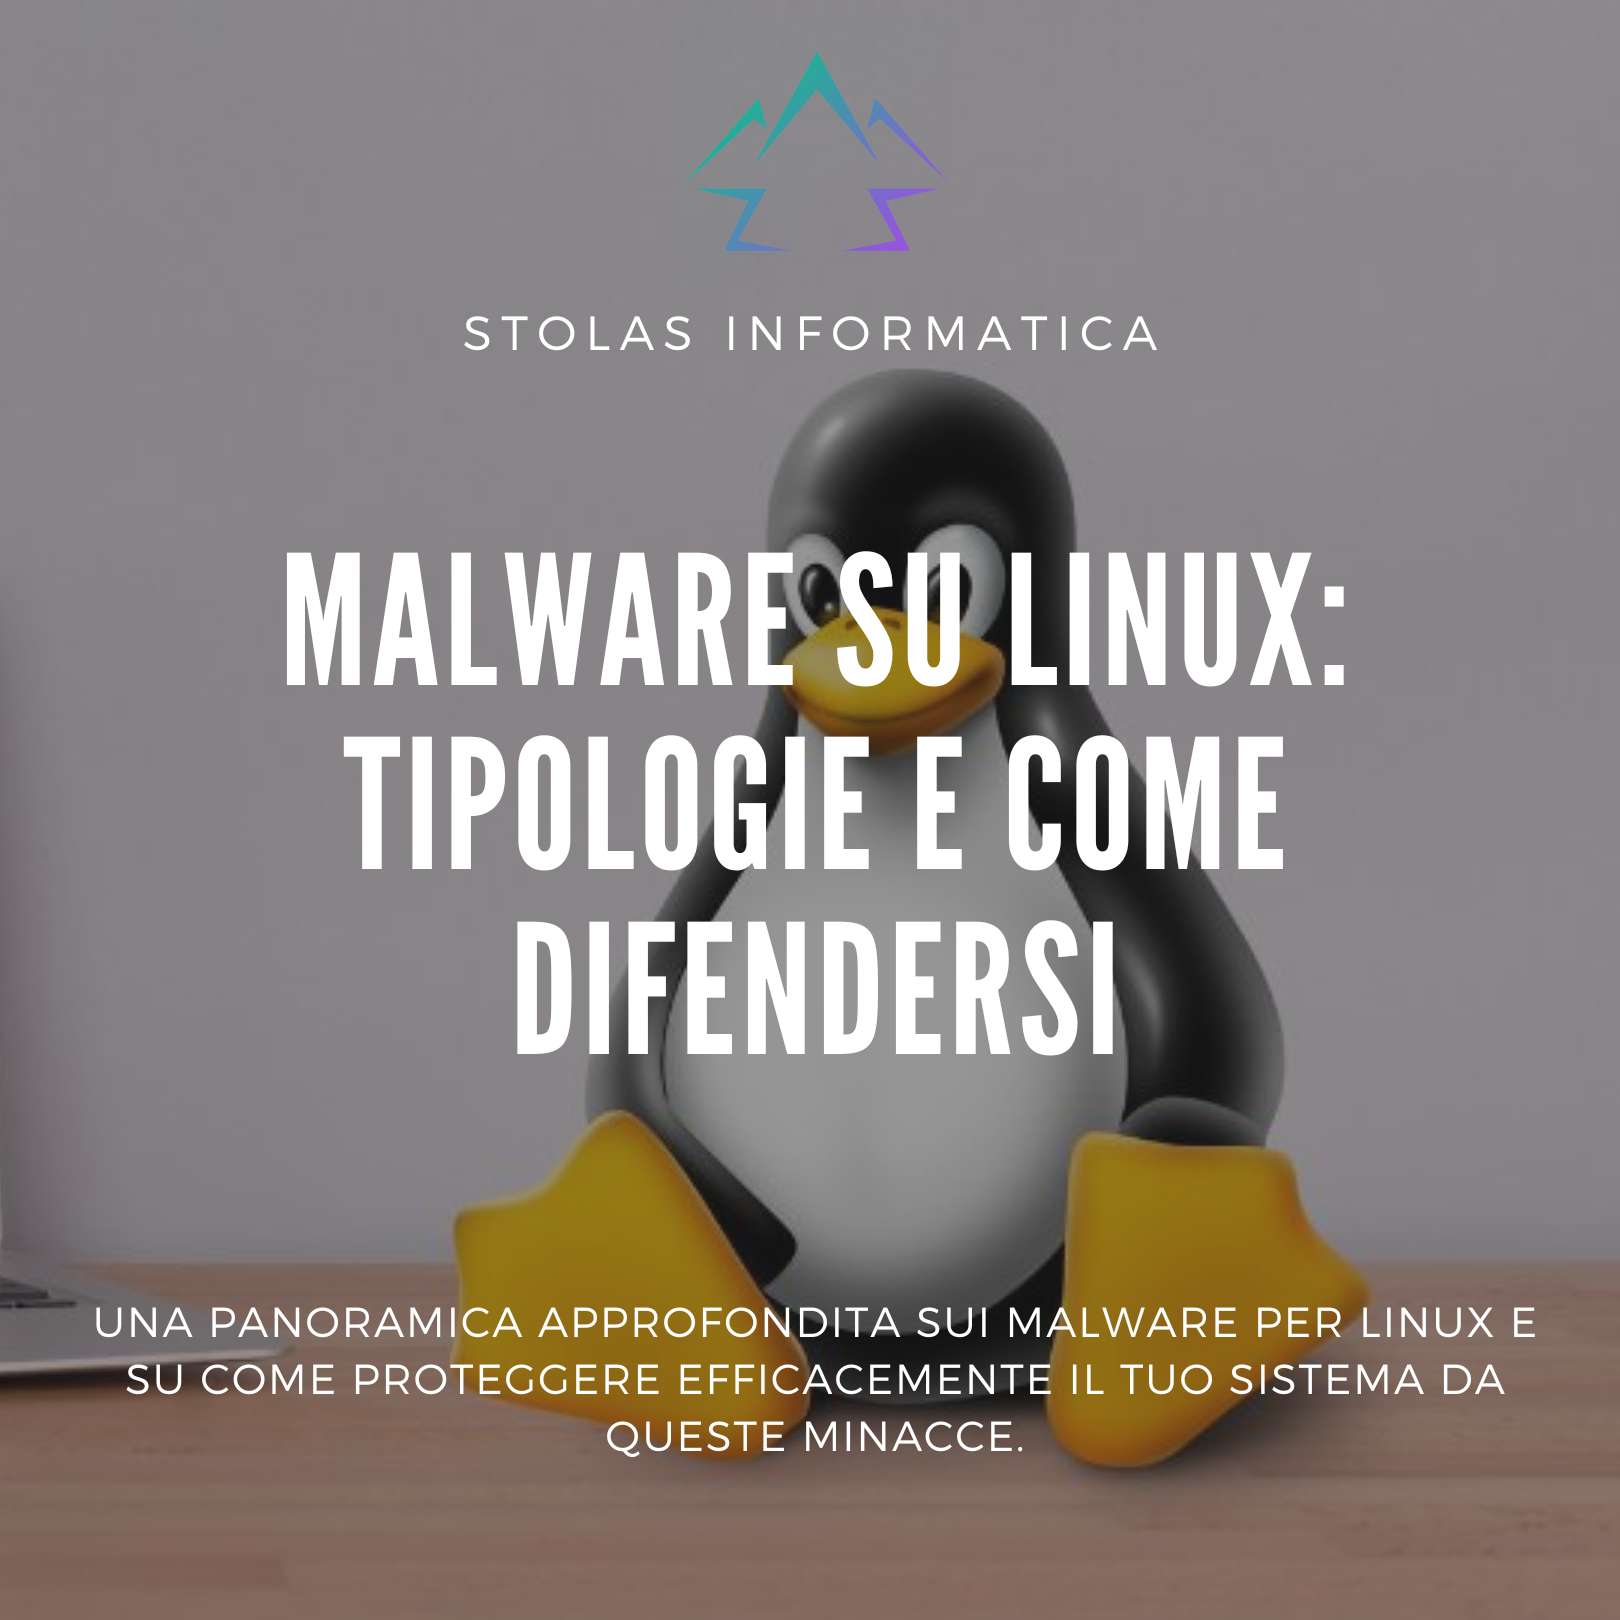 malware linux tipologie come difendersi cover